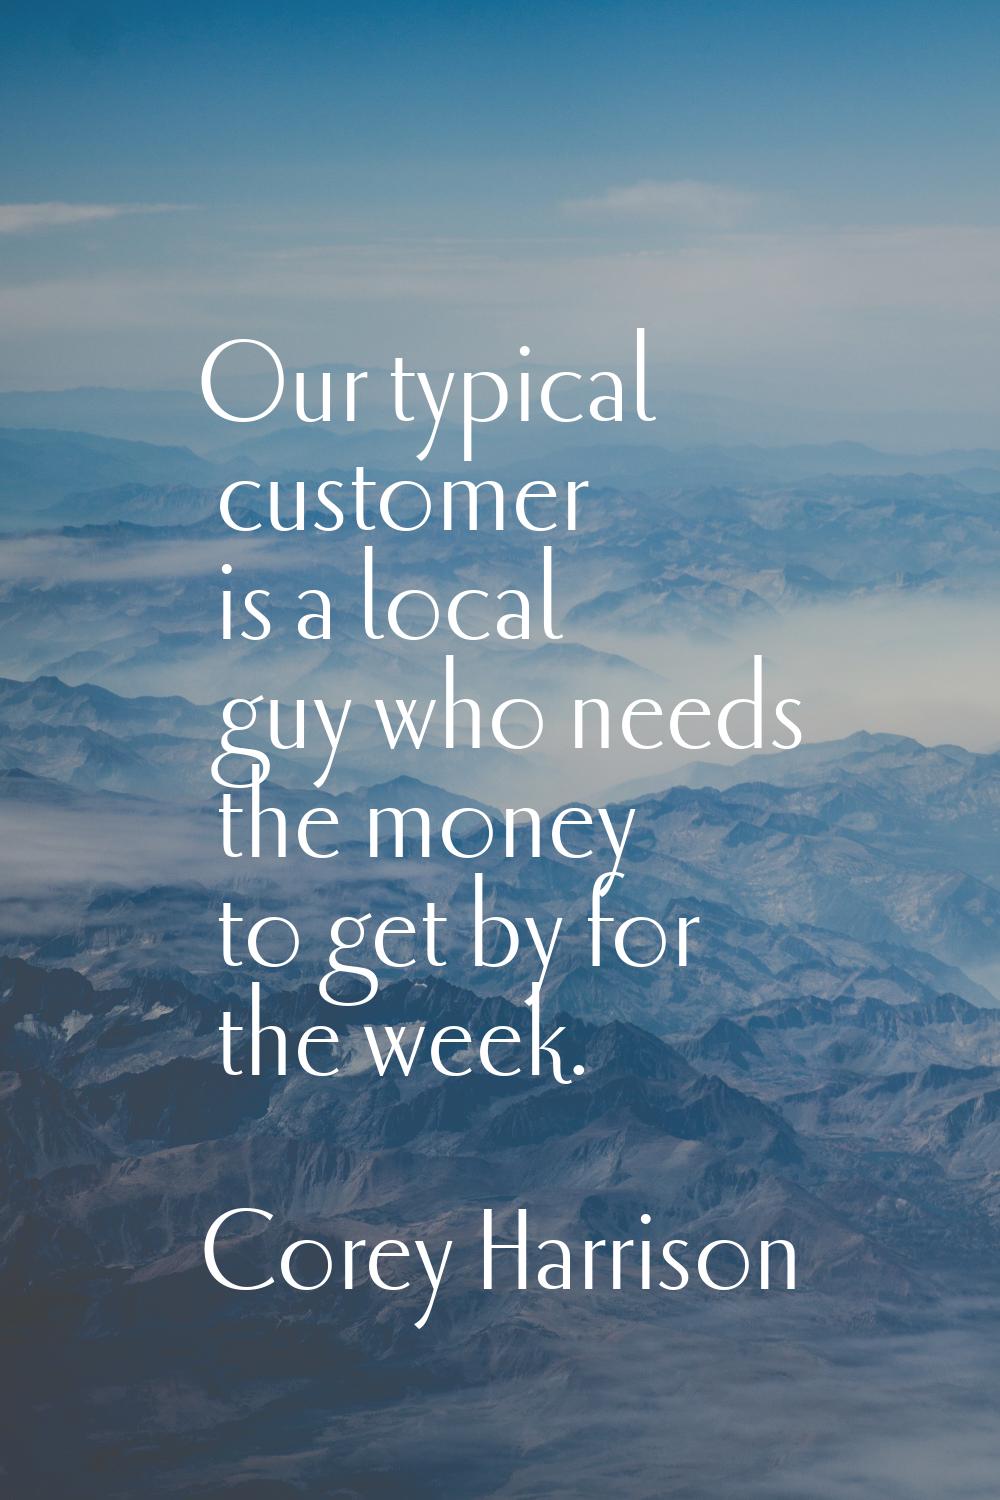 Our typical customer is a local guy who needs the money to get by for the week.